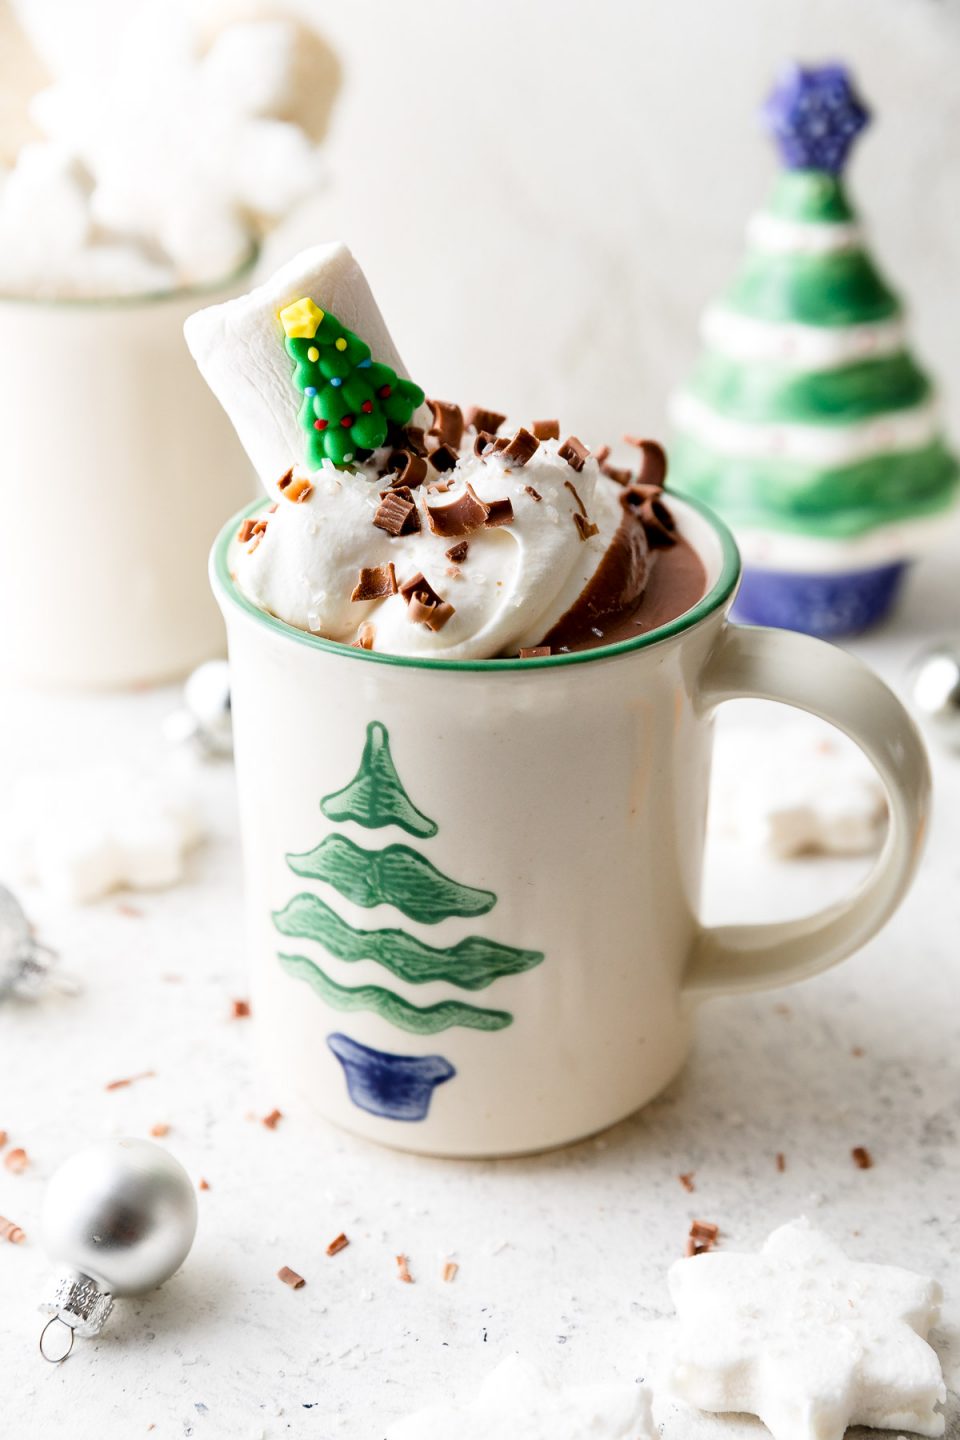 A white mug decorated with a Christmas tree is filled with Christmas Hot Chocolate, topped with whipped cream, & garnished with chocolate shavings & a Christmas tree marshmallow. The mug sits atop a white surface alongside marshmallows, ornaments, & small Christmas decorations.